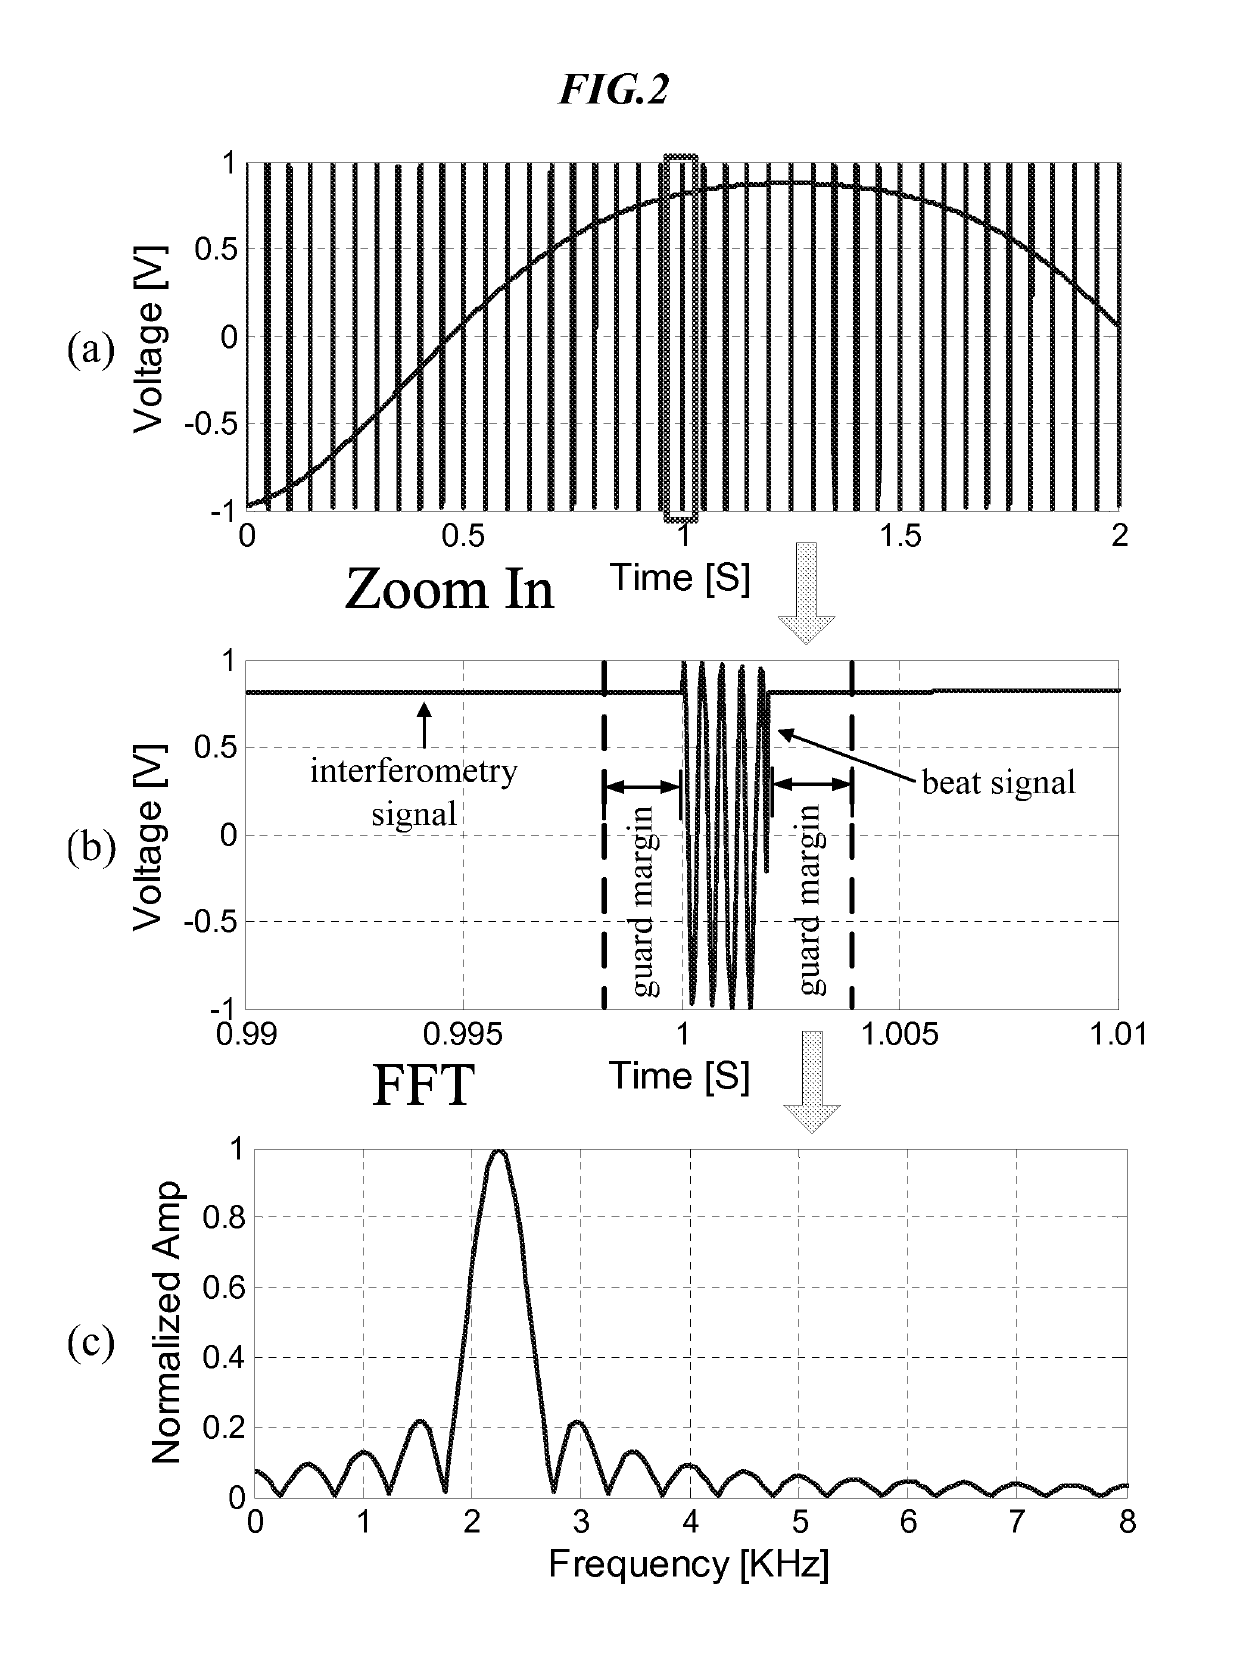 Hybrid FMCW-interferometry radar for positioning and monitoring and methods of using same